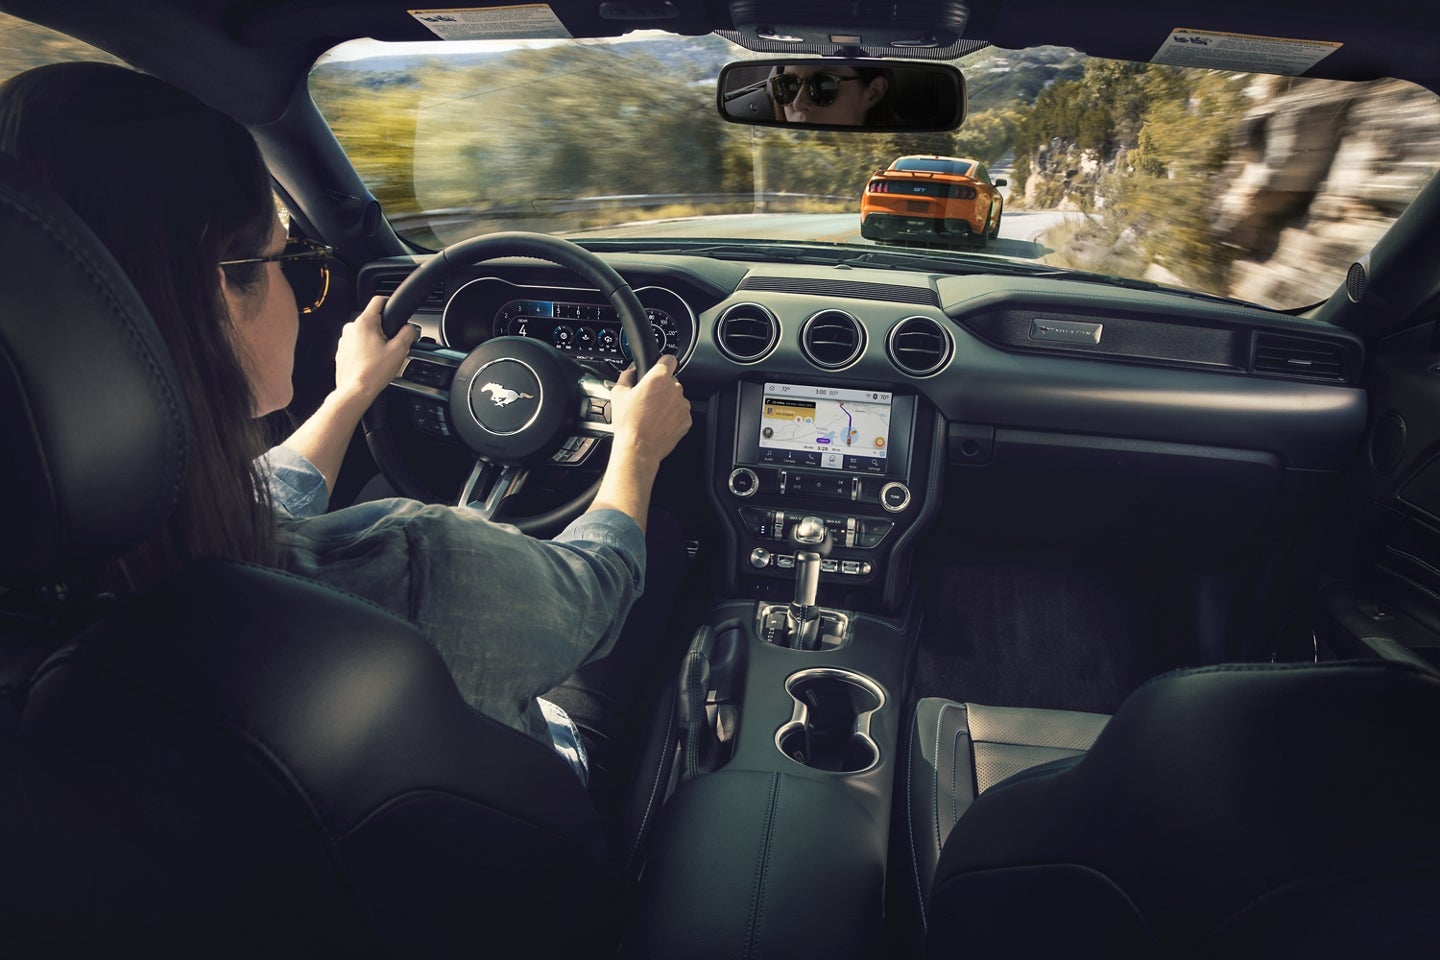 Cockpit of the 2020 Mustang